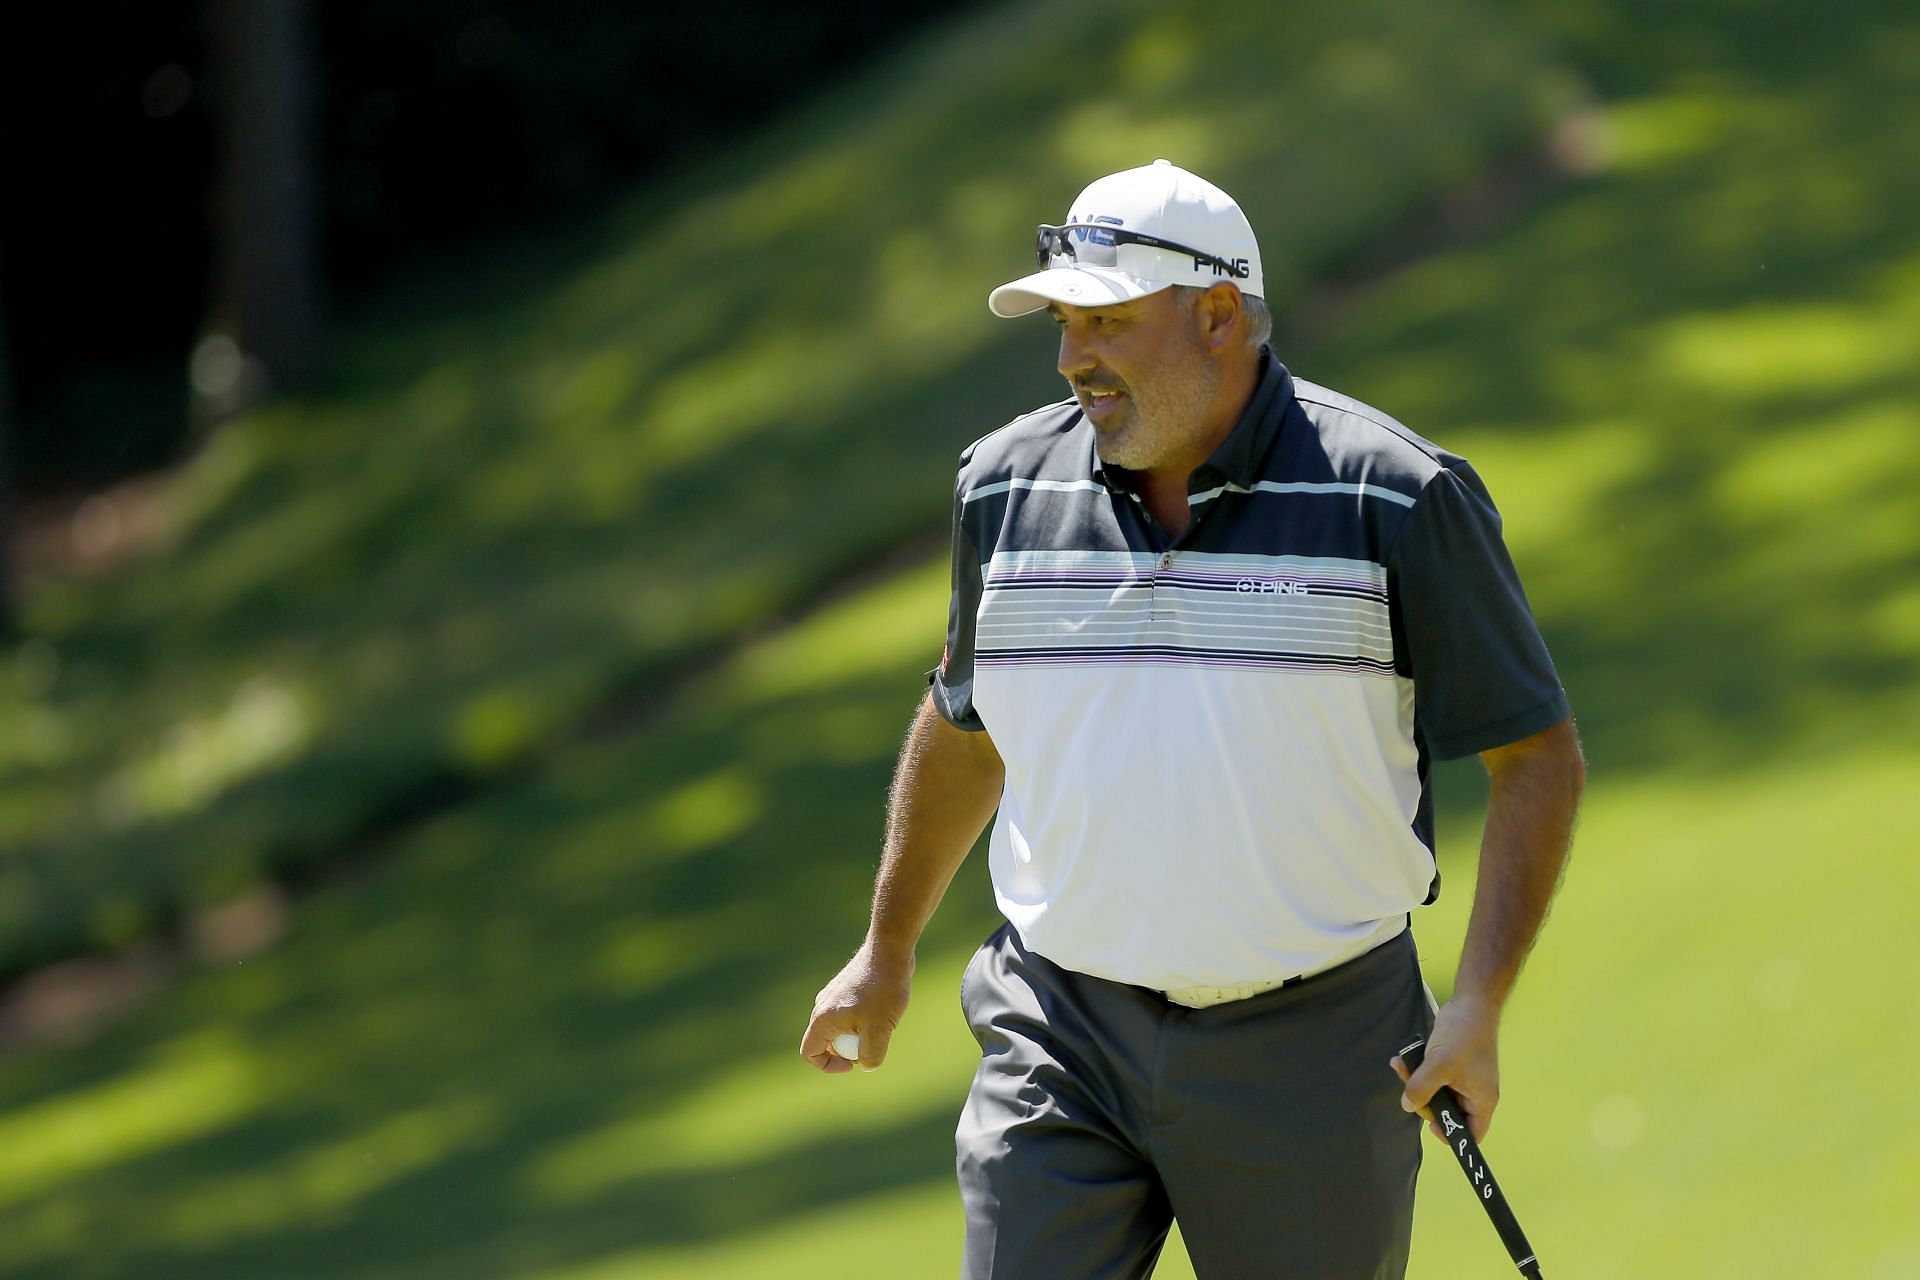 Angel Cabrera during the 2019 Masters - Par 3 Contest